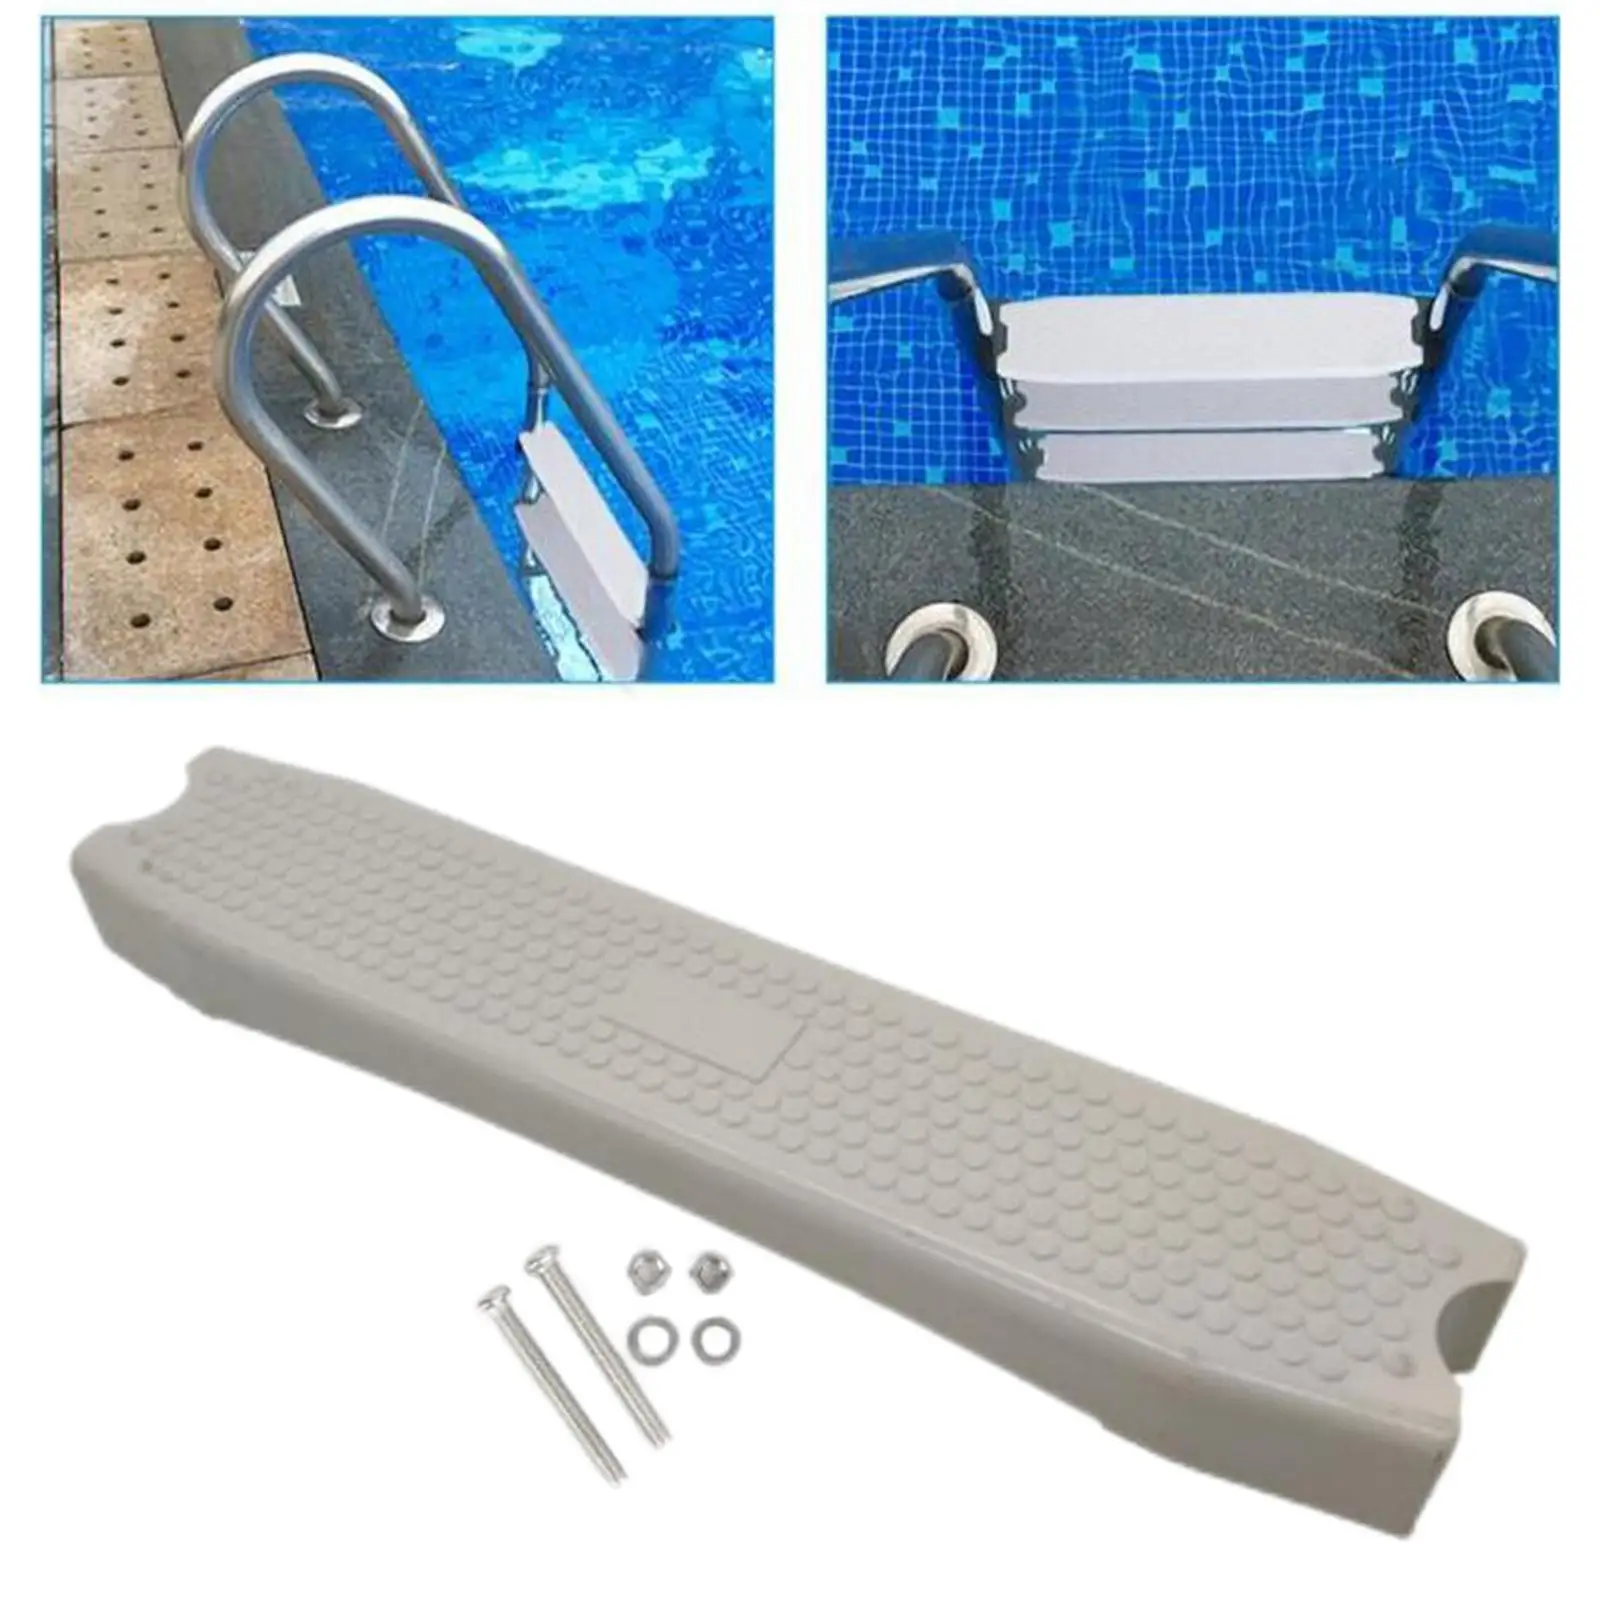 Escalator Pedal Non Slip Pedal Accessory in Ground Entry Stair Replacement with Screws Swimming Pool Underwater Step Rung Ladder